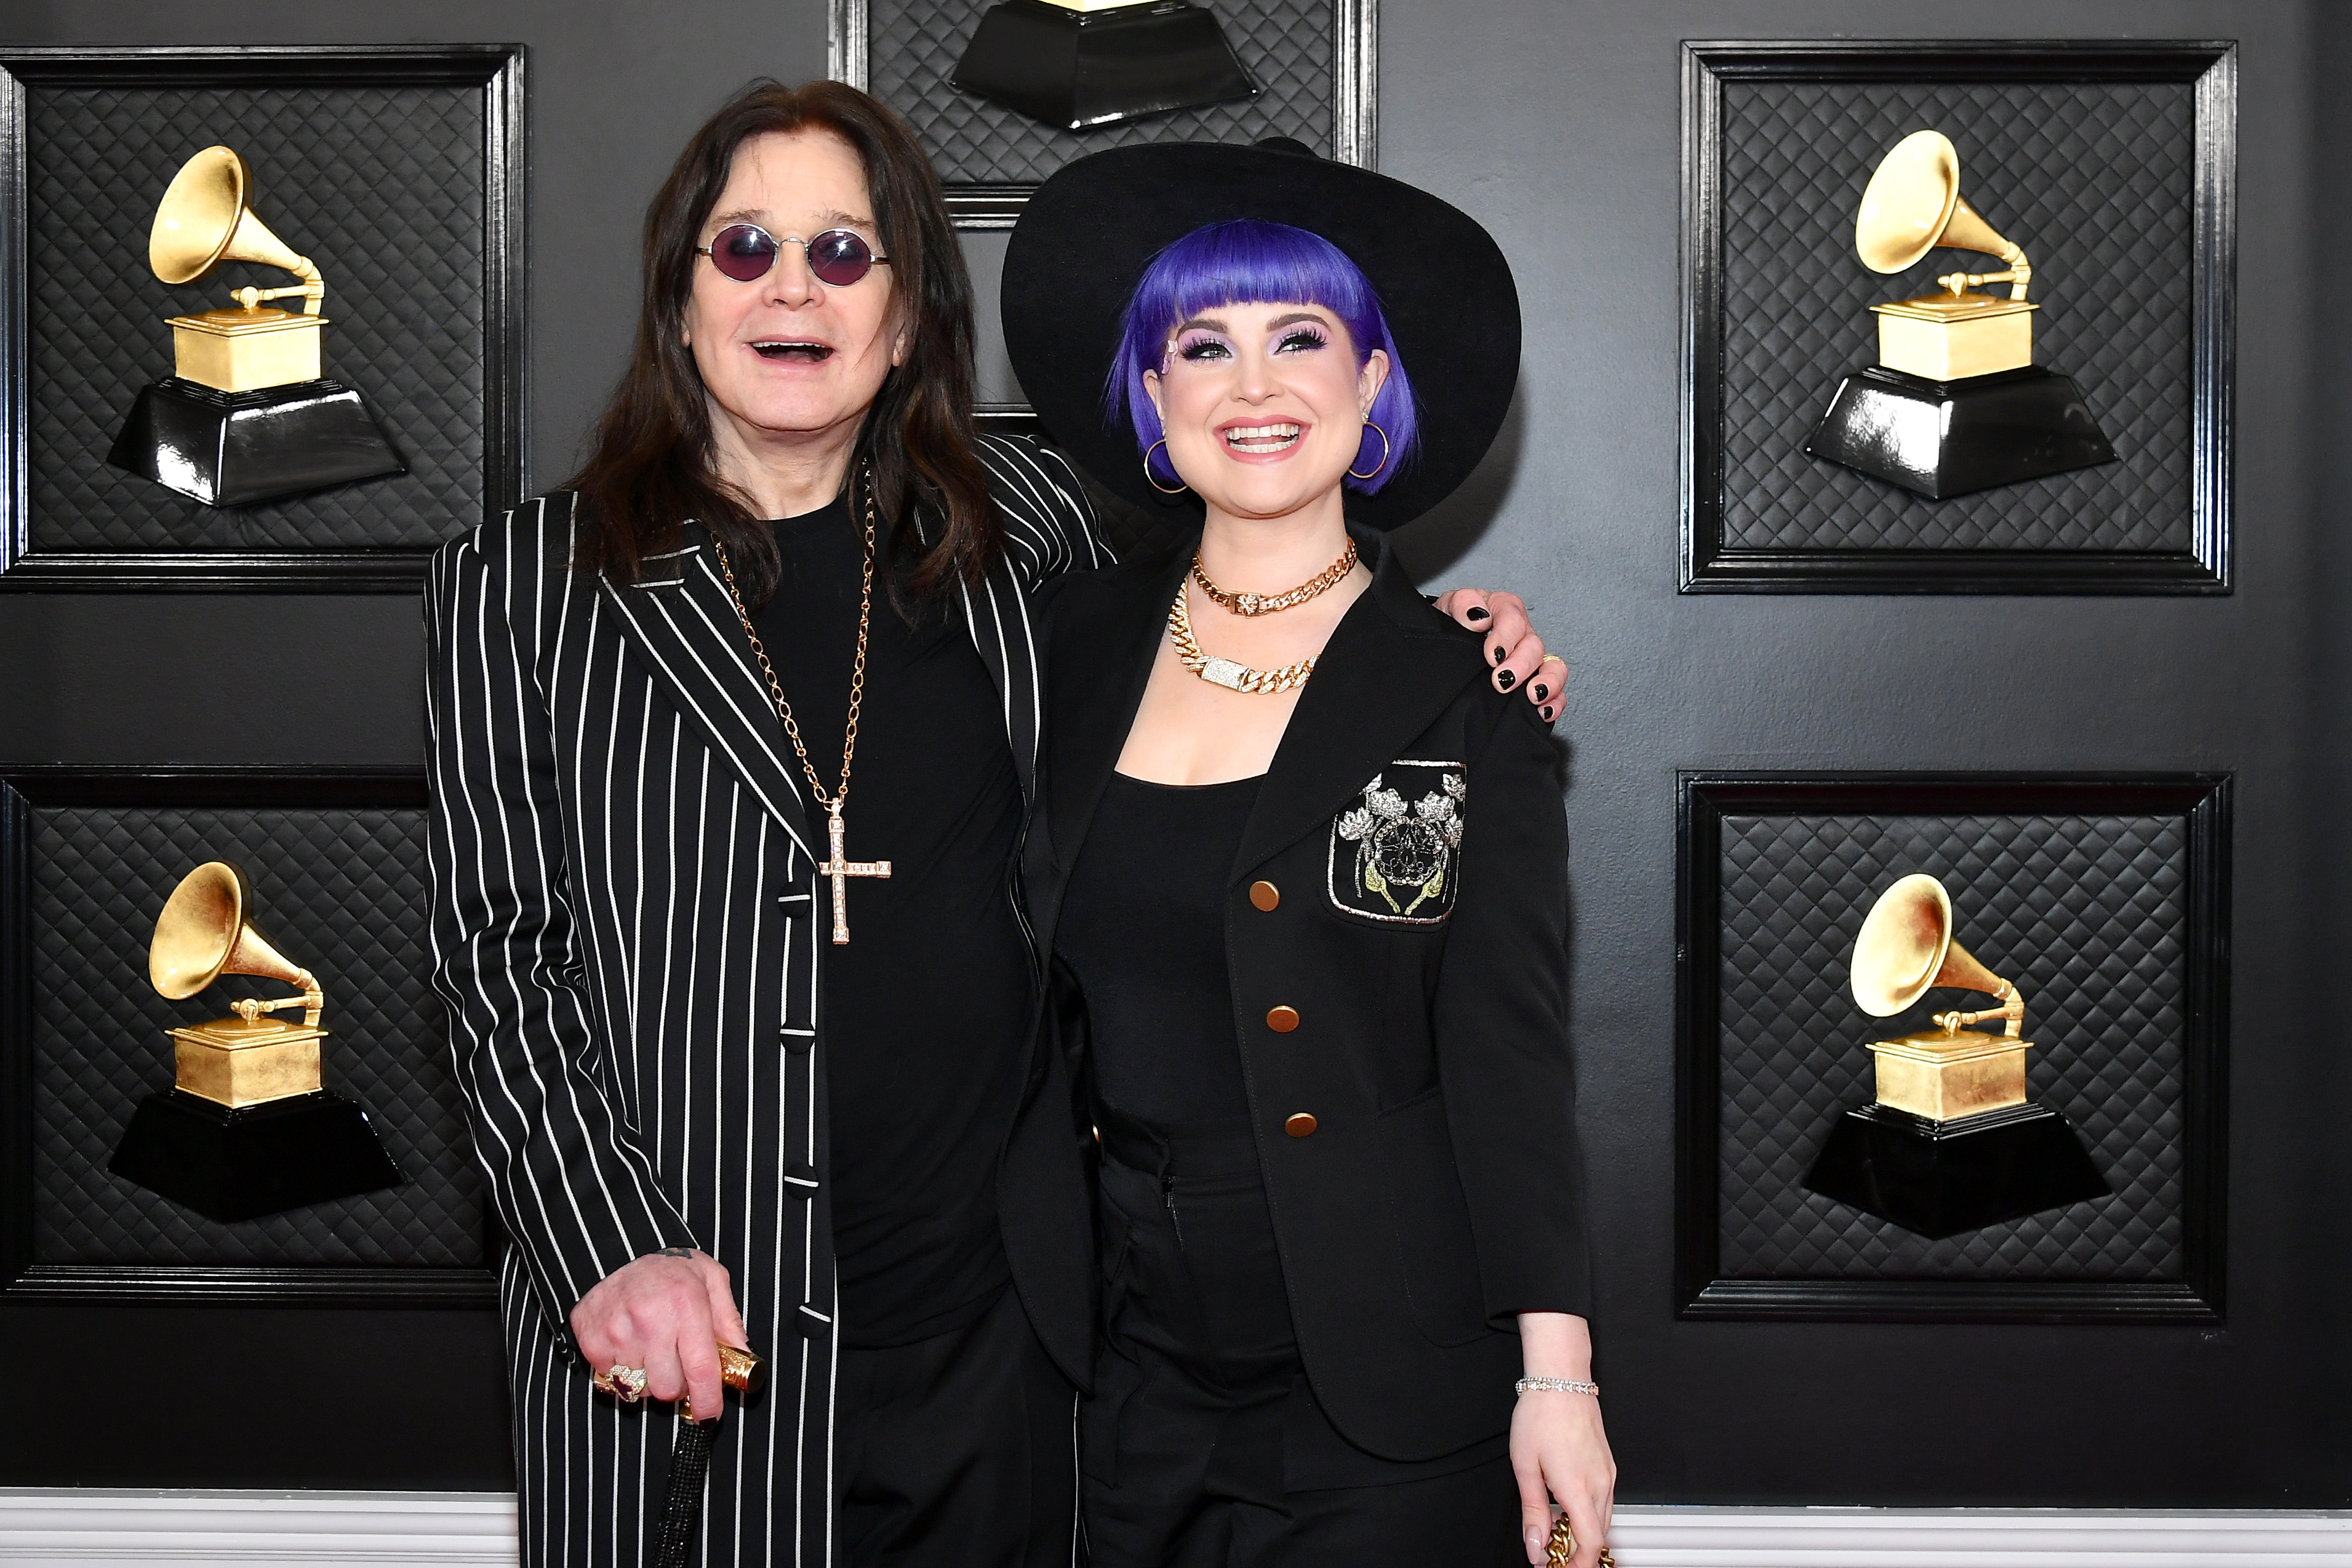 Kelly Osbourne and Ozzy Osbourne, 2020 | Source: Getty Images